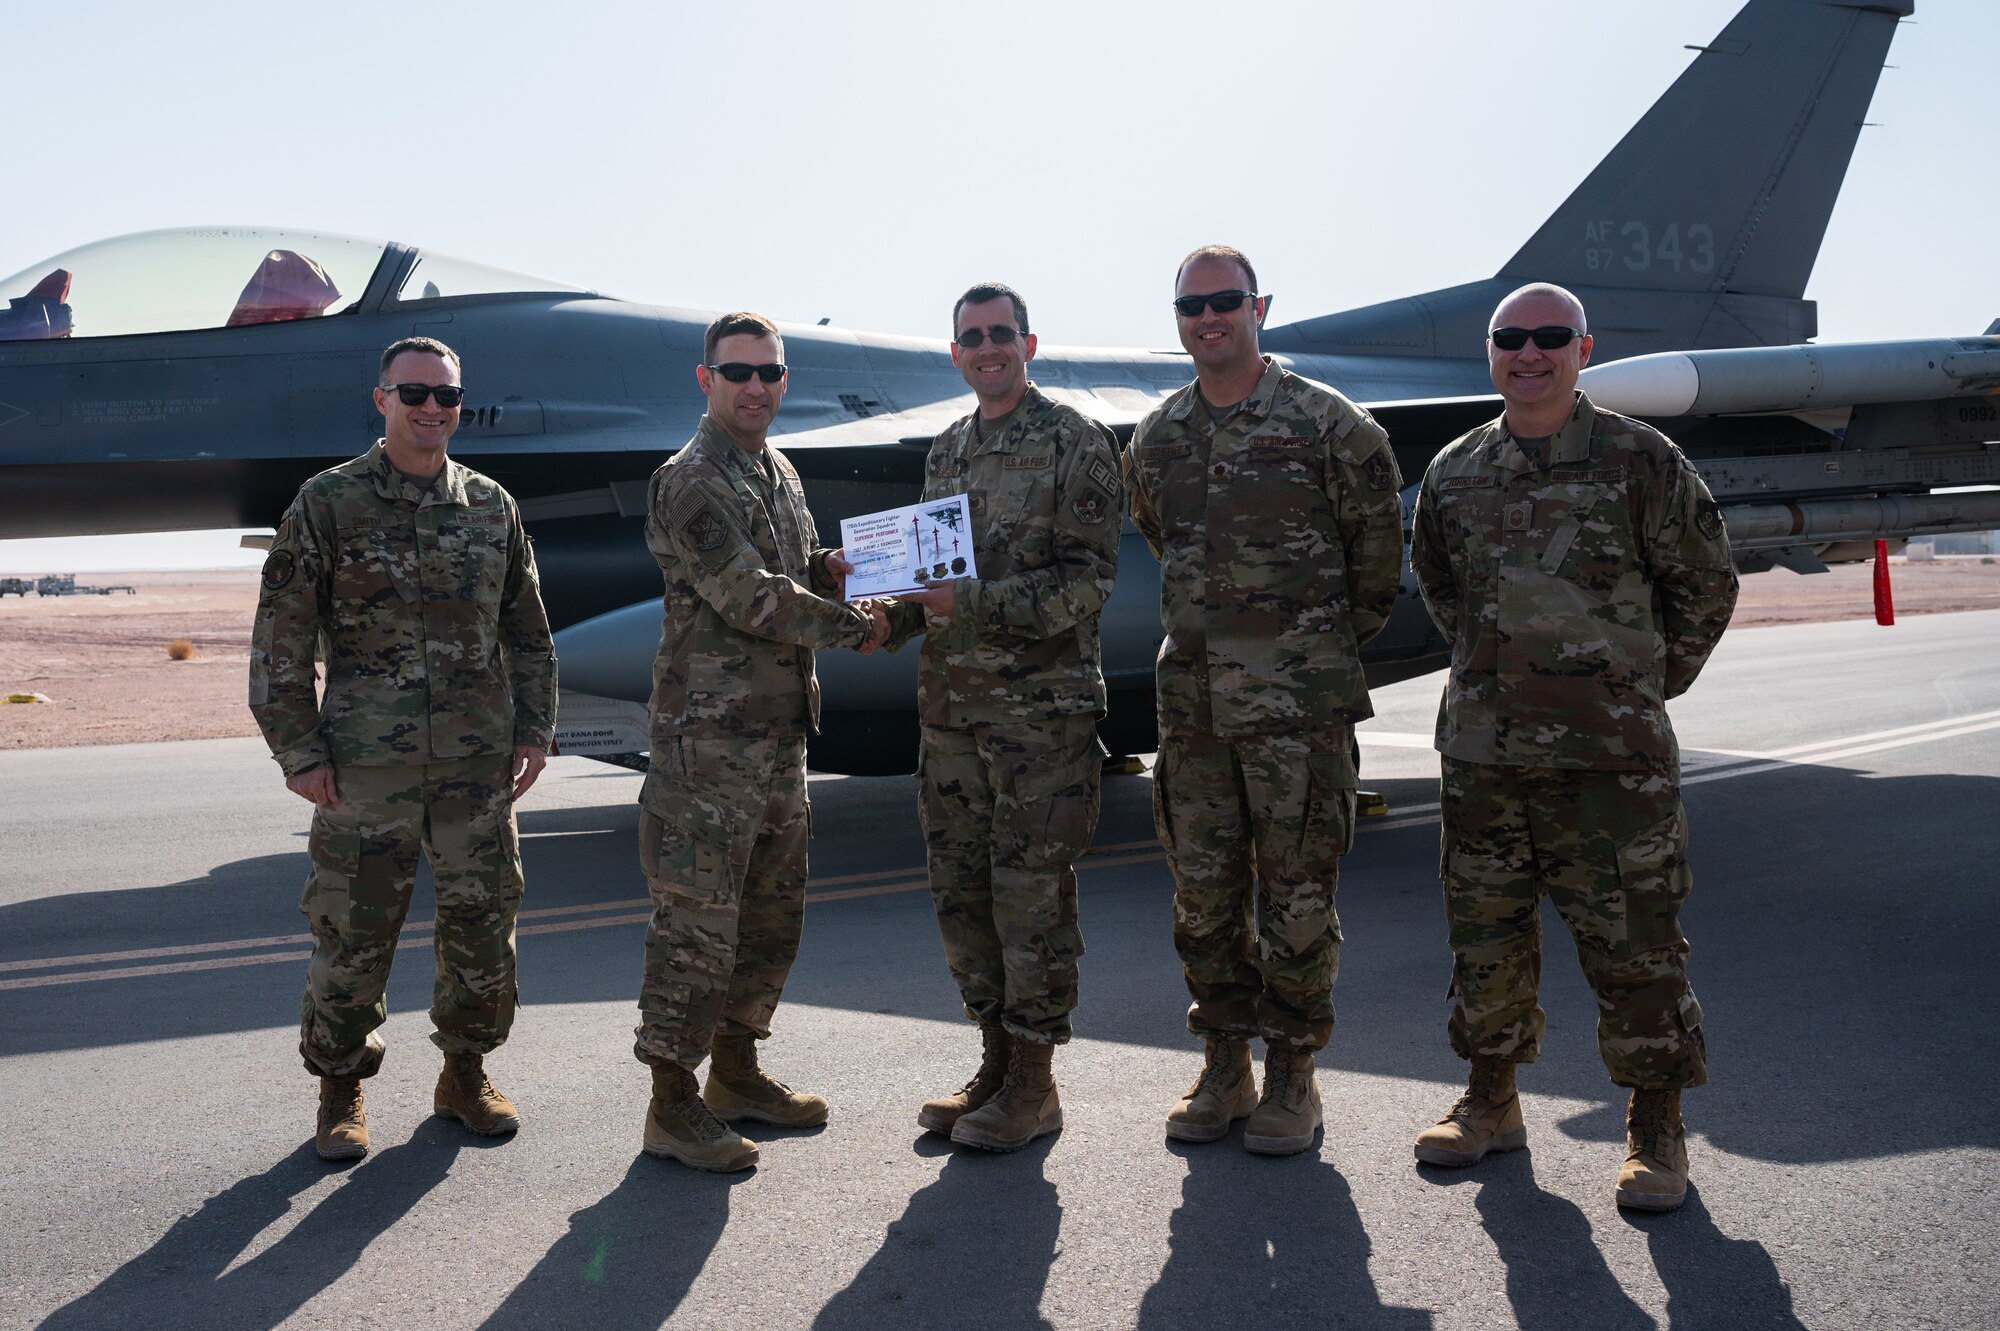 Tech. Sgt. Jeremy Rasmussen, 176th Expeditionary Fighter Squadron aircraft electrical and environmental systems specialist, receives a superior performer certificate from Brig. Gen. Robert Davis, 378th Air Expeditionary Wing commander, at Prince Sultan Air Base, Kingdom of Saudi Arabia, Nov. 23, 2021. Rasmussen was recognized for his superior performance in Iron Falcon 2021, a bilateral training exercise with Saudi coalition partners. (U.S. Air Force photo by Senior Airman Jacob B. Wrightsman)